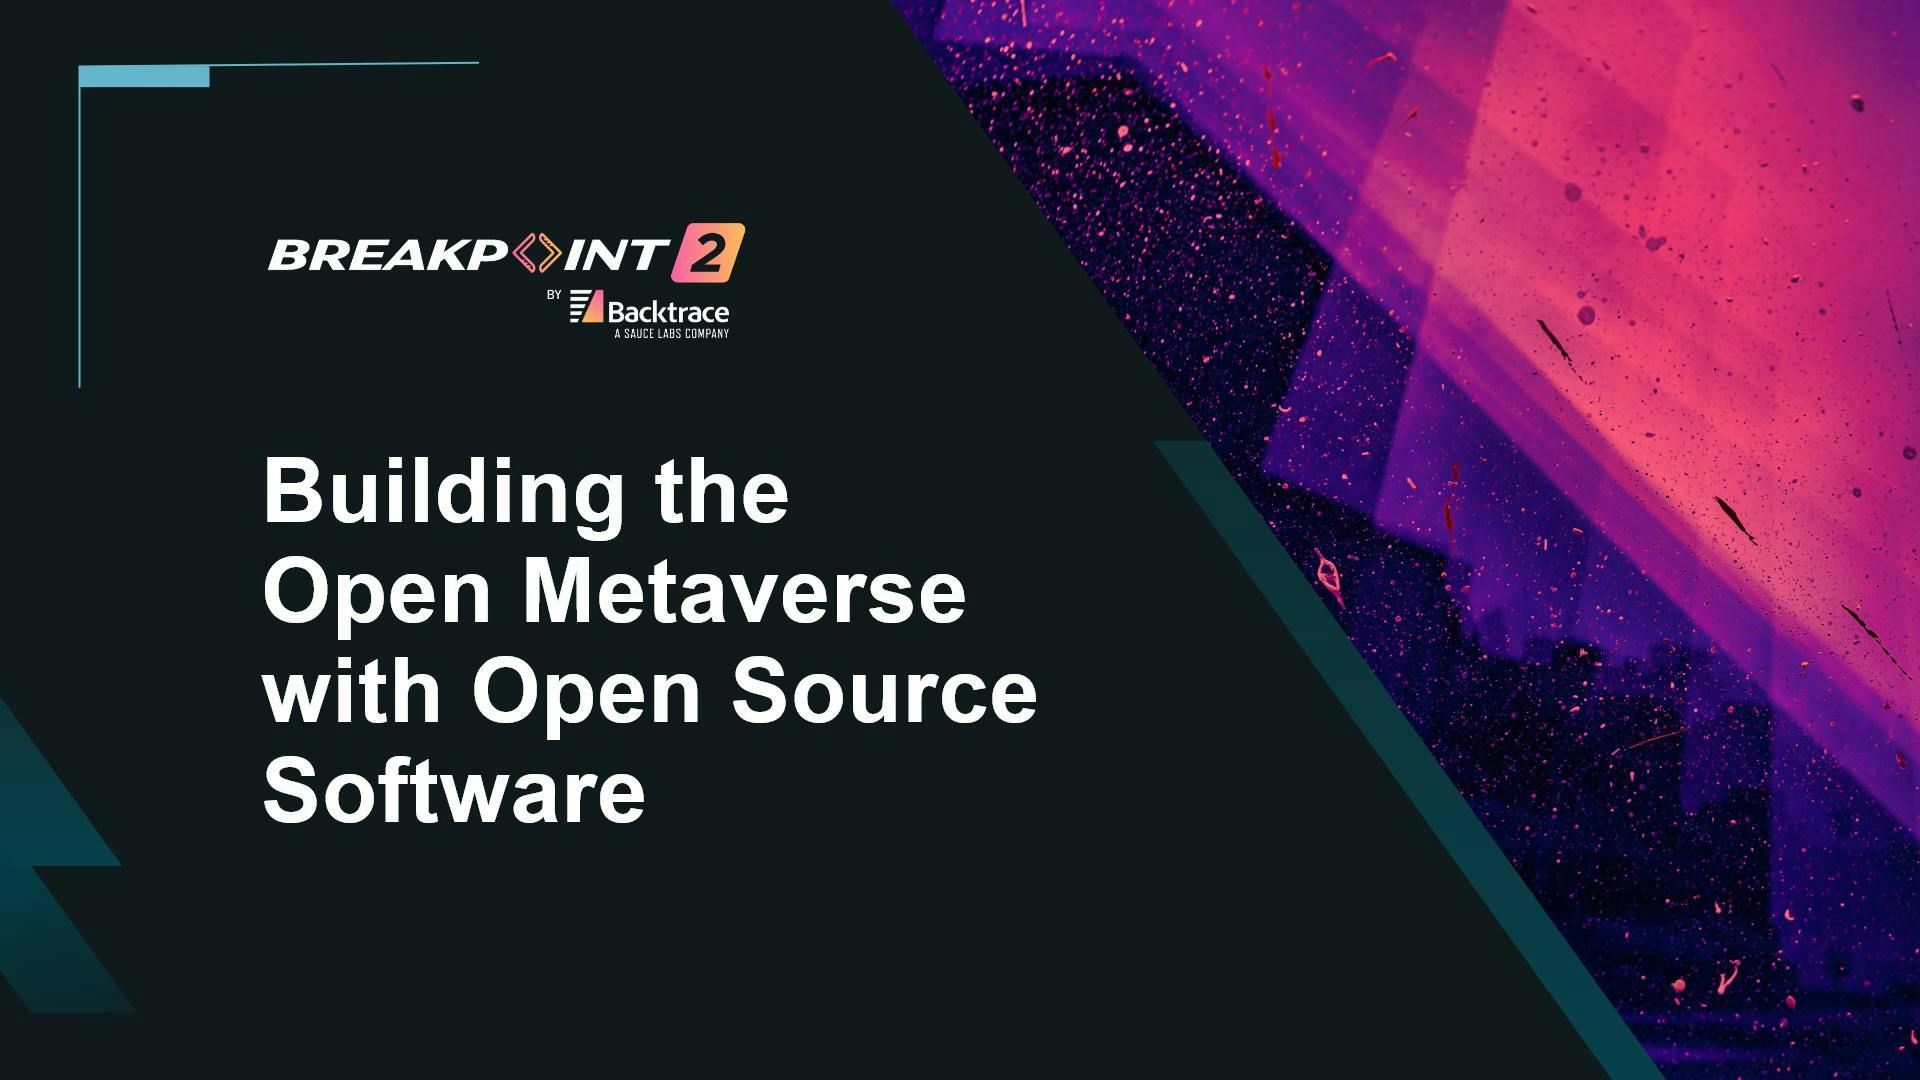 Keynote: Building the Open Metaverse with Open Source Software